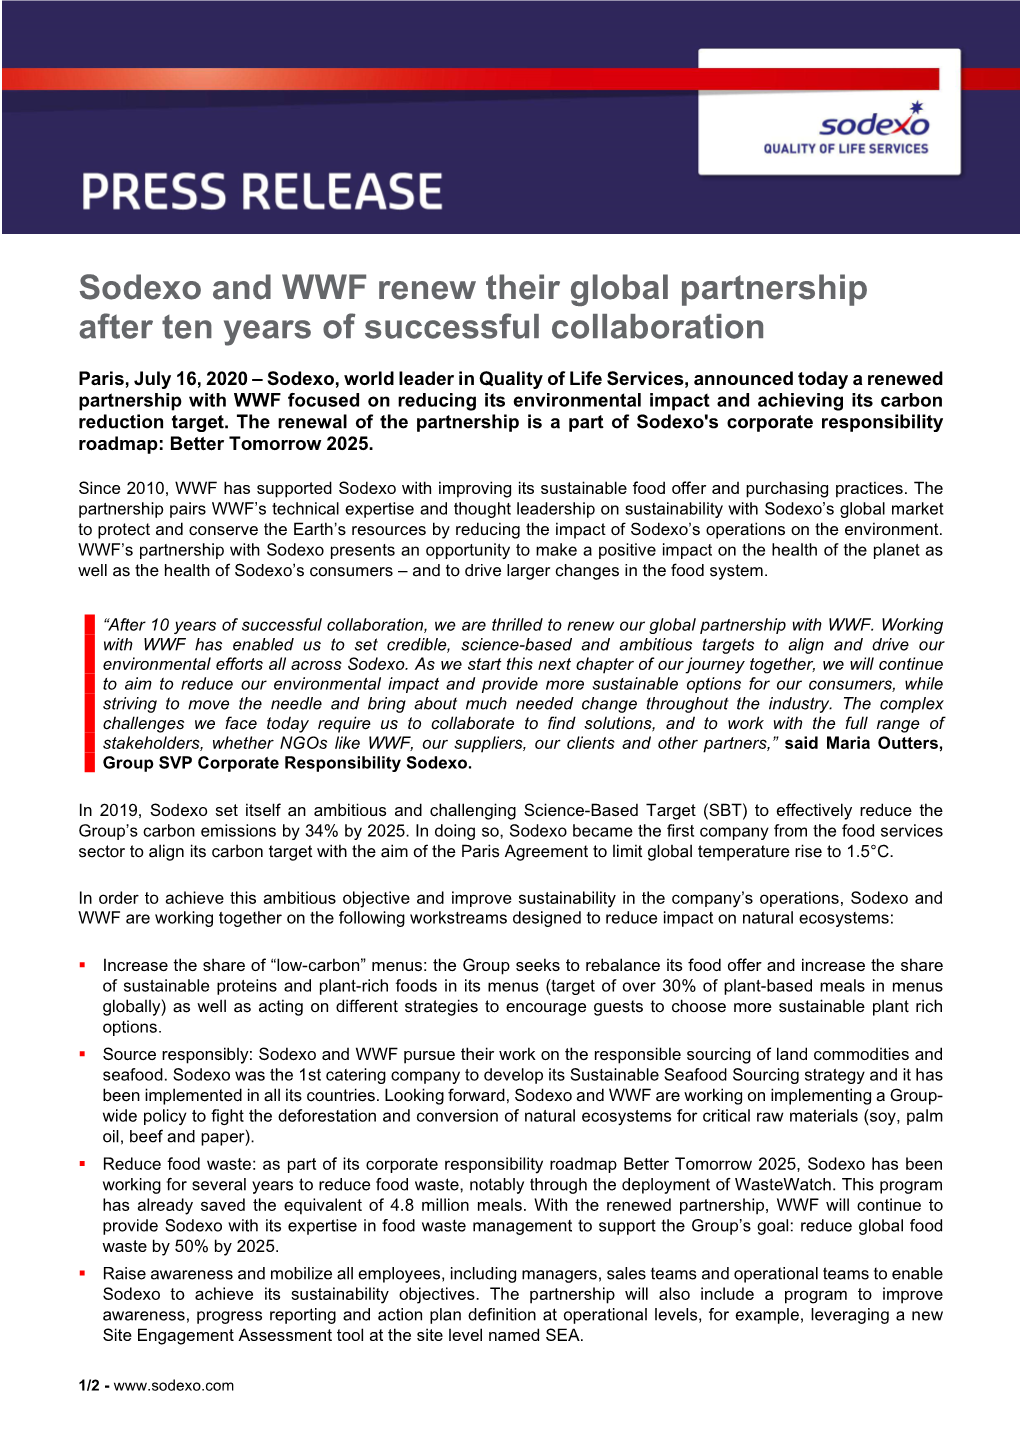 Sodexo and WWF Renew Their Global Partnership After Ten Years of Successful Collaboration